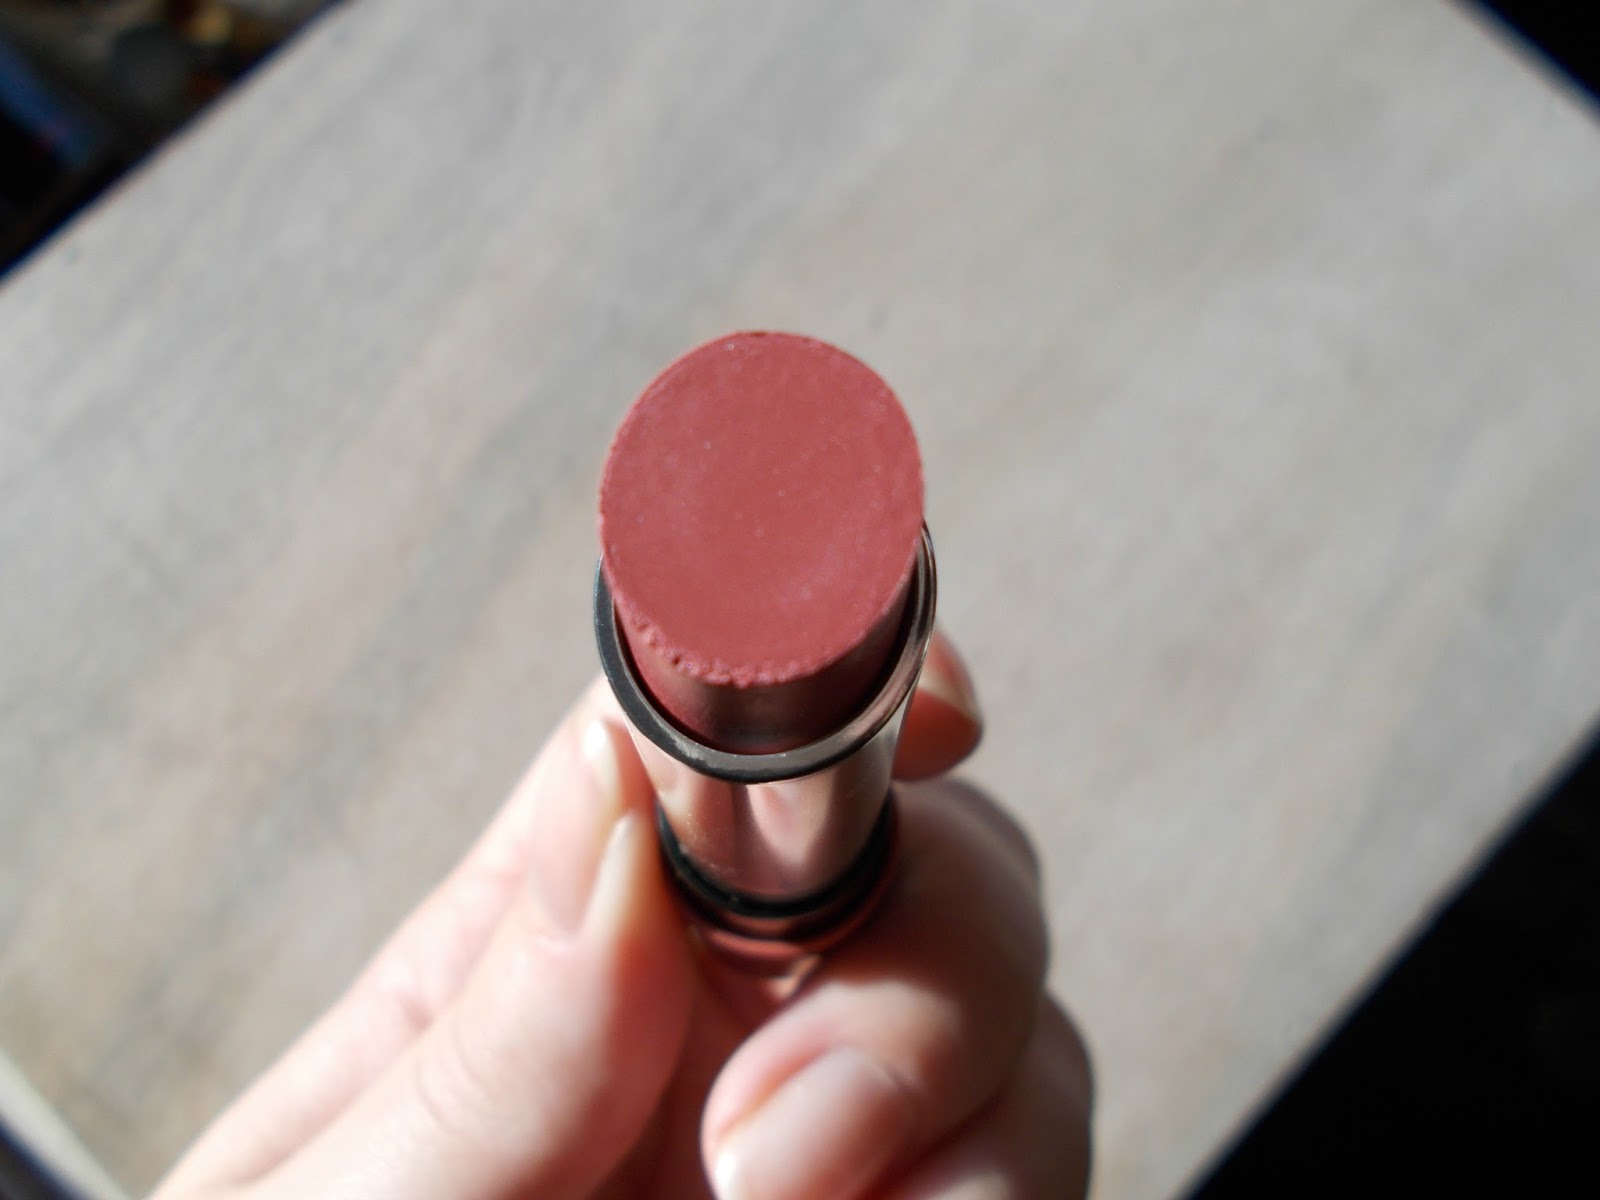 Rimmel The Only 1 lipstick 700 Naughty Nude bullet